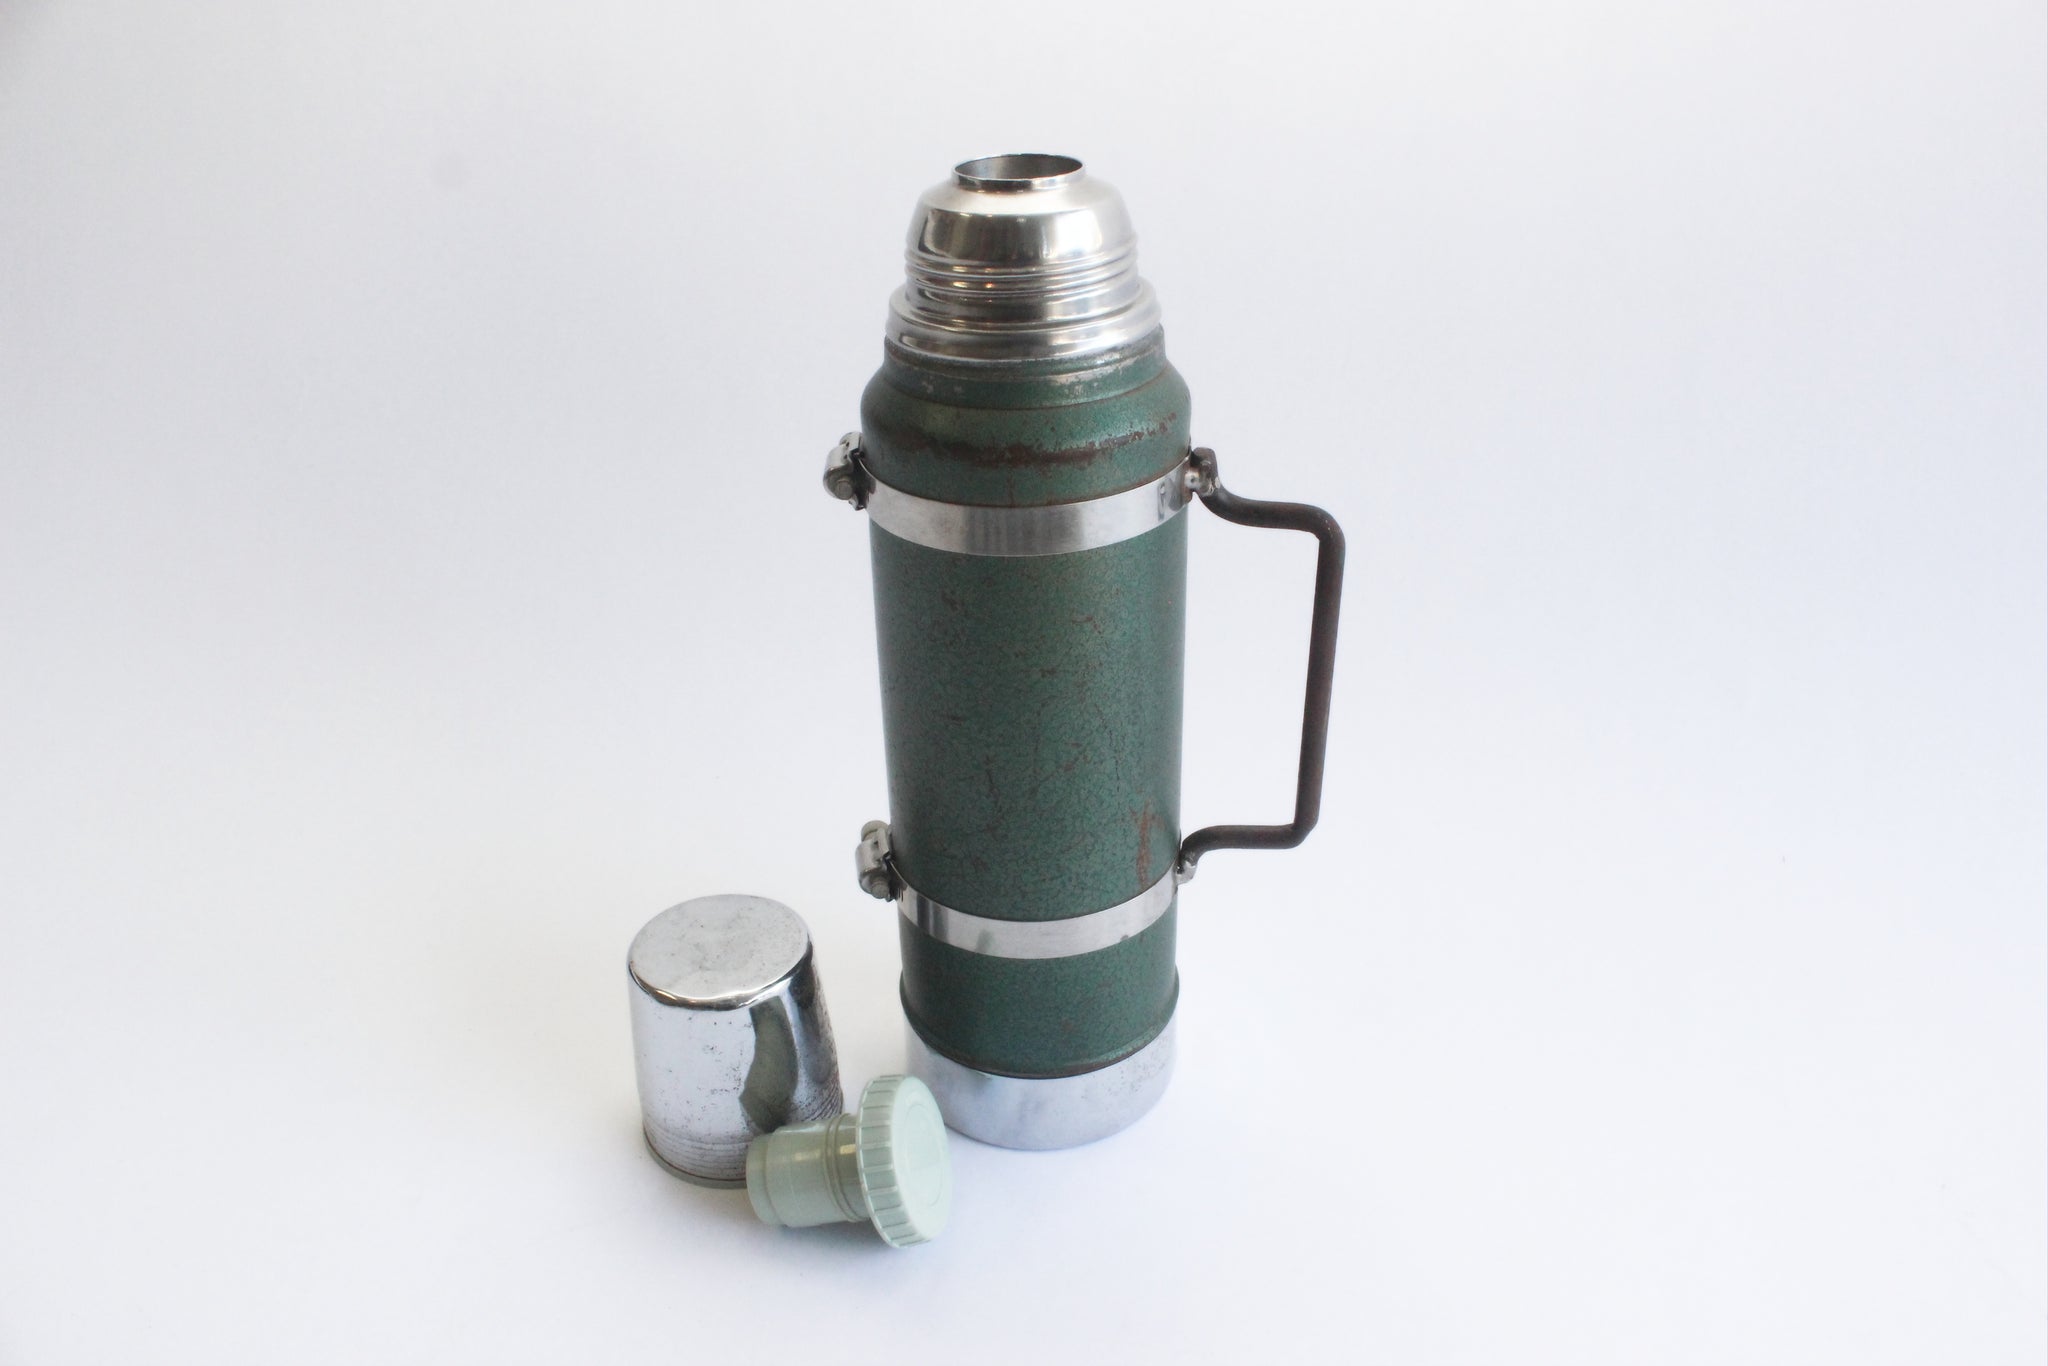 Stanley, Dining, Vintage Stanley Thermos Camo Tape